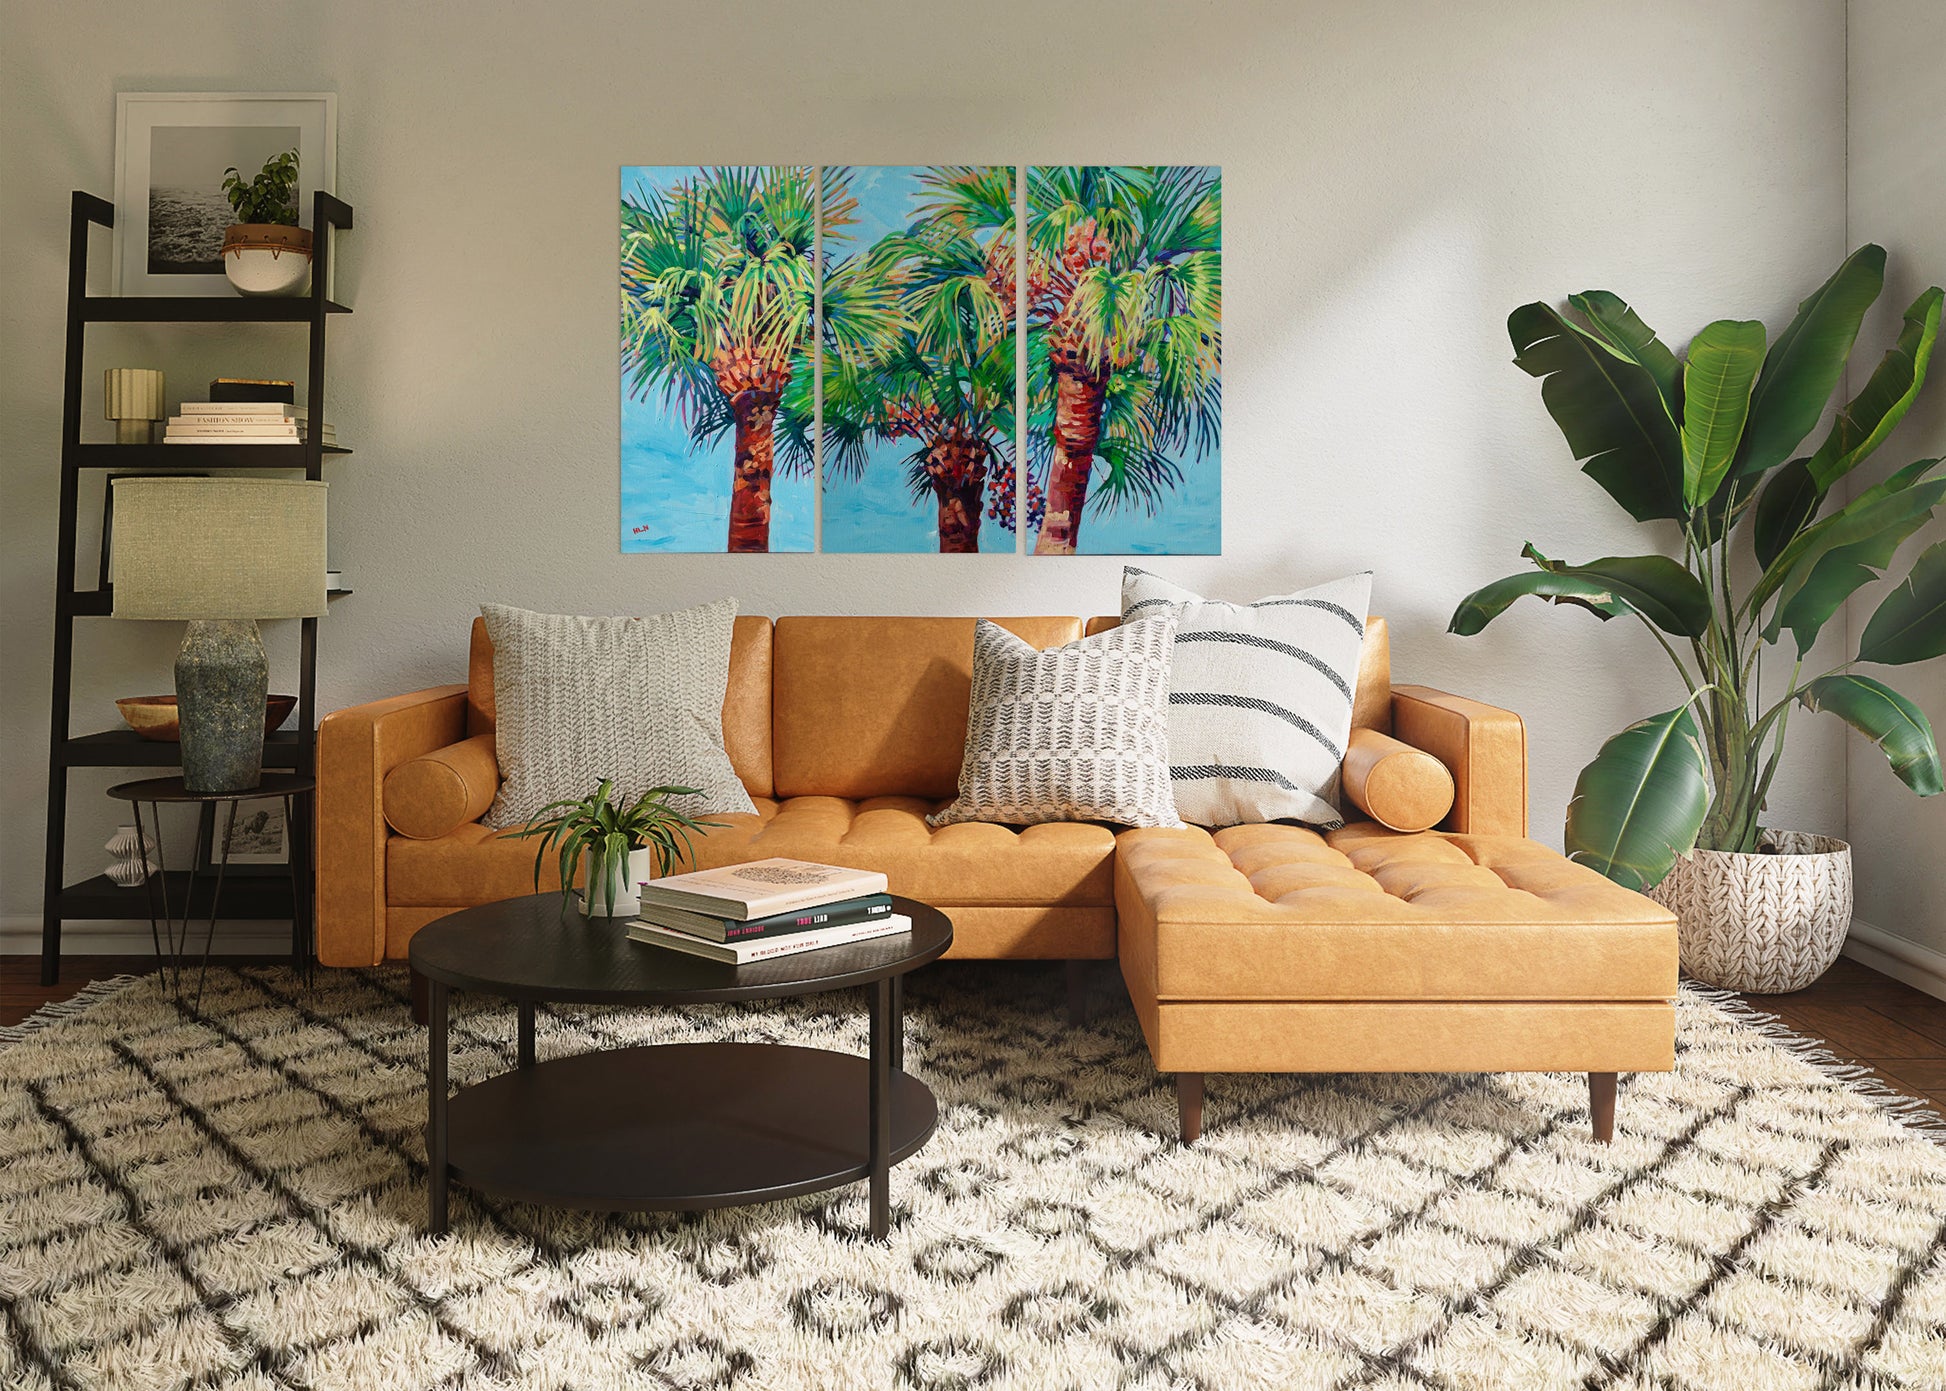 Florida topical palm tree triptych painting in a living room setting